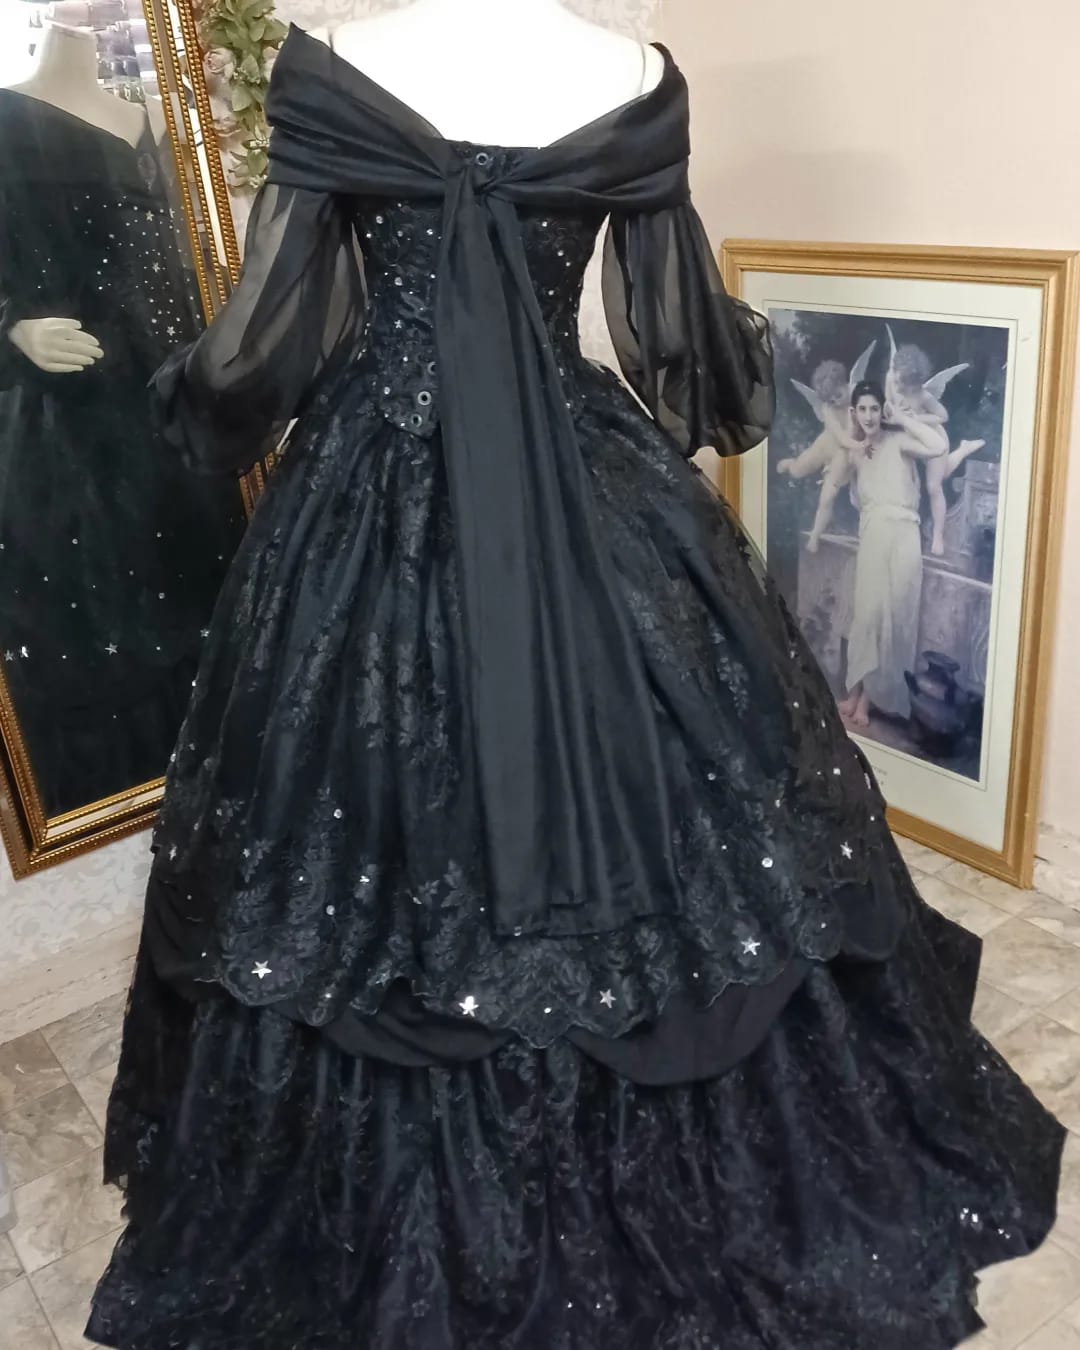 SOLD! Black Starry Night Gothic/Victorian Gown with Stars + veil